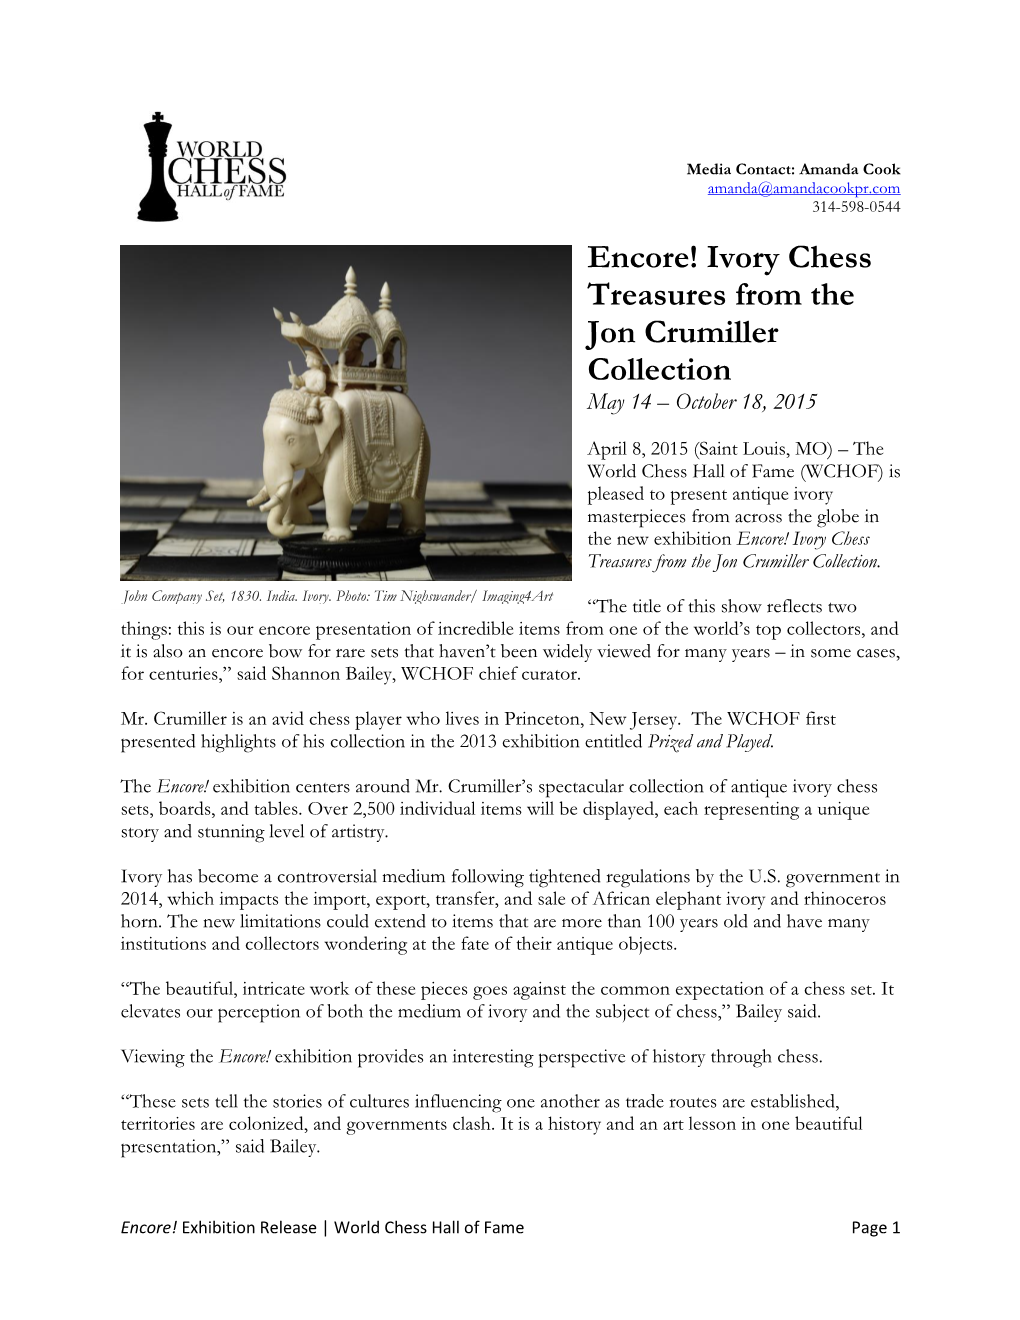 Encore! Ivory Chess Treasures from the Jon Crumiller Collection May 14 – October 18, 2015